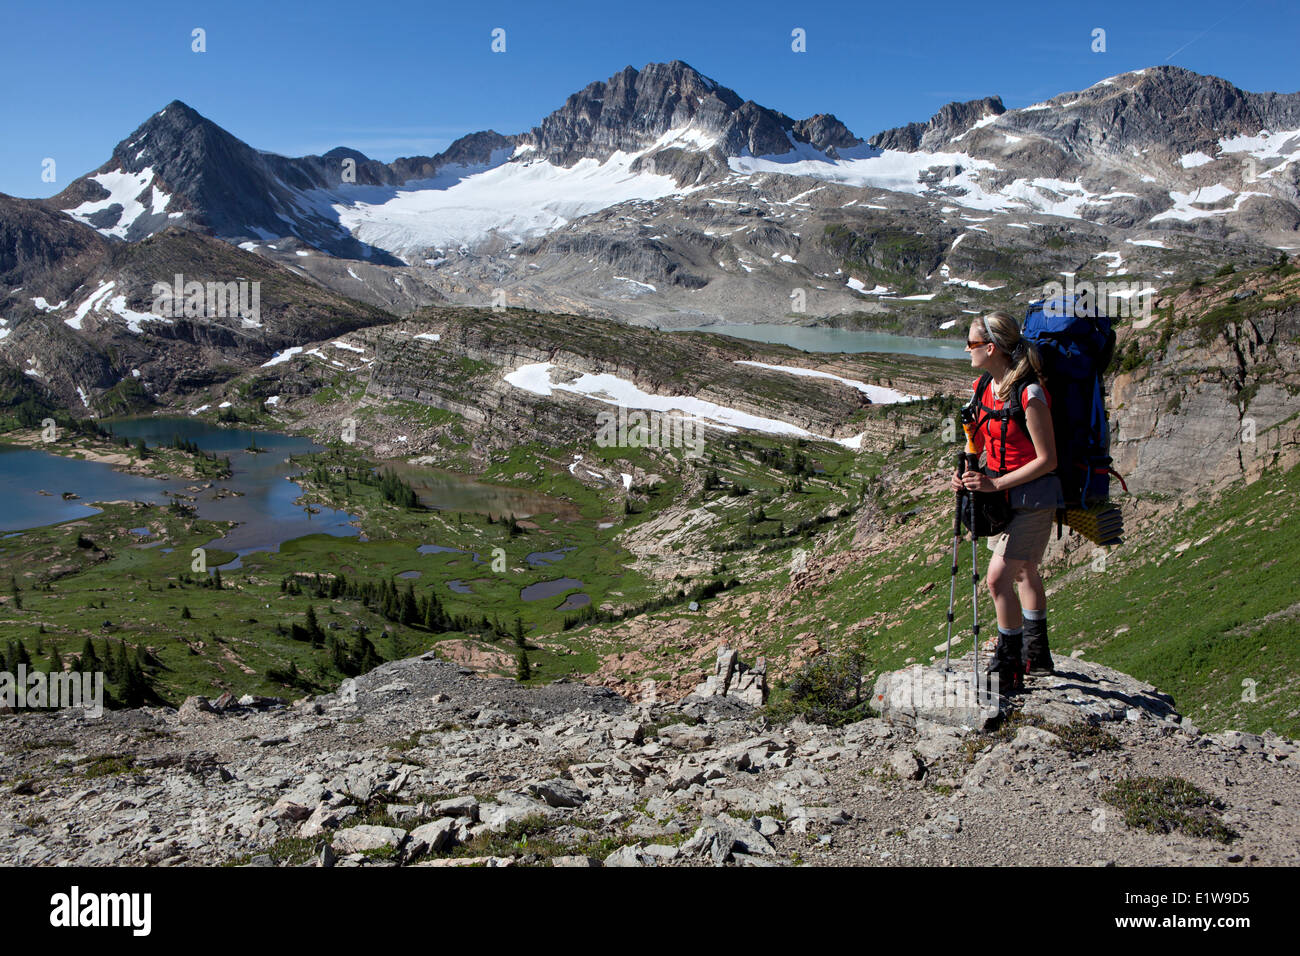 Backpakcer at Limestone Lakes Basin and Russell Peak, Height of the Rockies Provincial Park, British Columbia, Canada Stock Photo